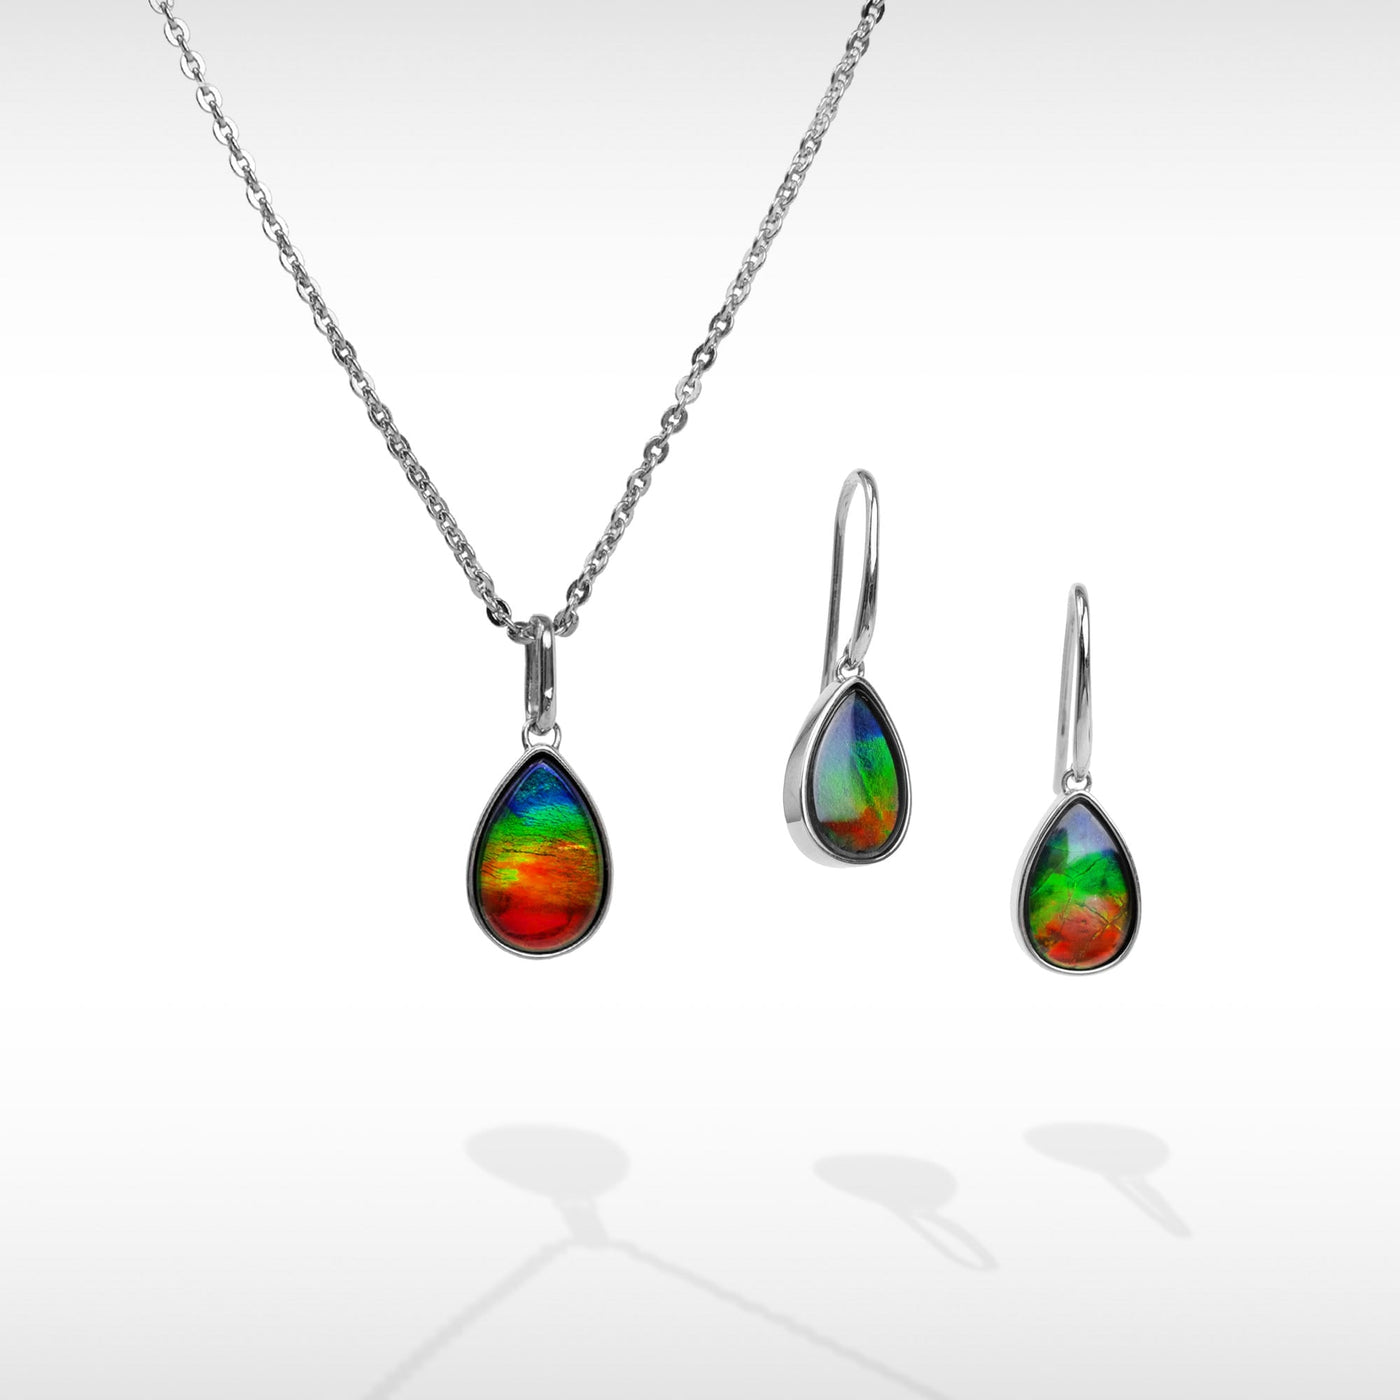 Essentials pear ammolite pendant and earring set in sterling silver